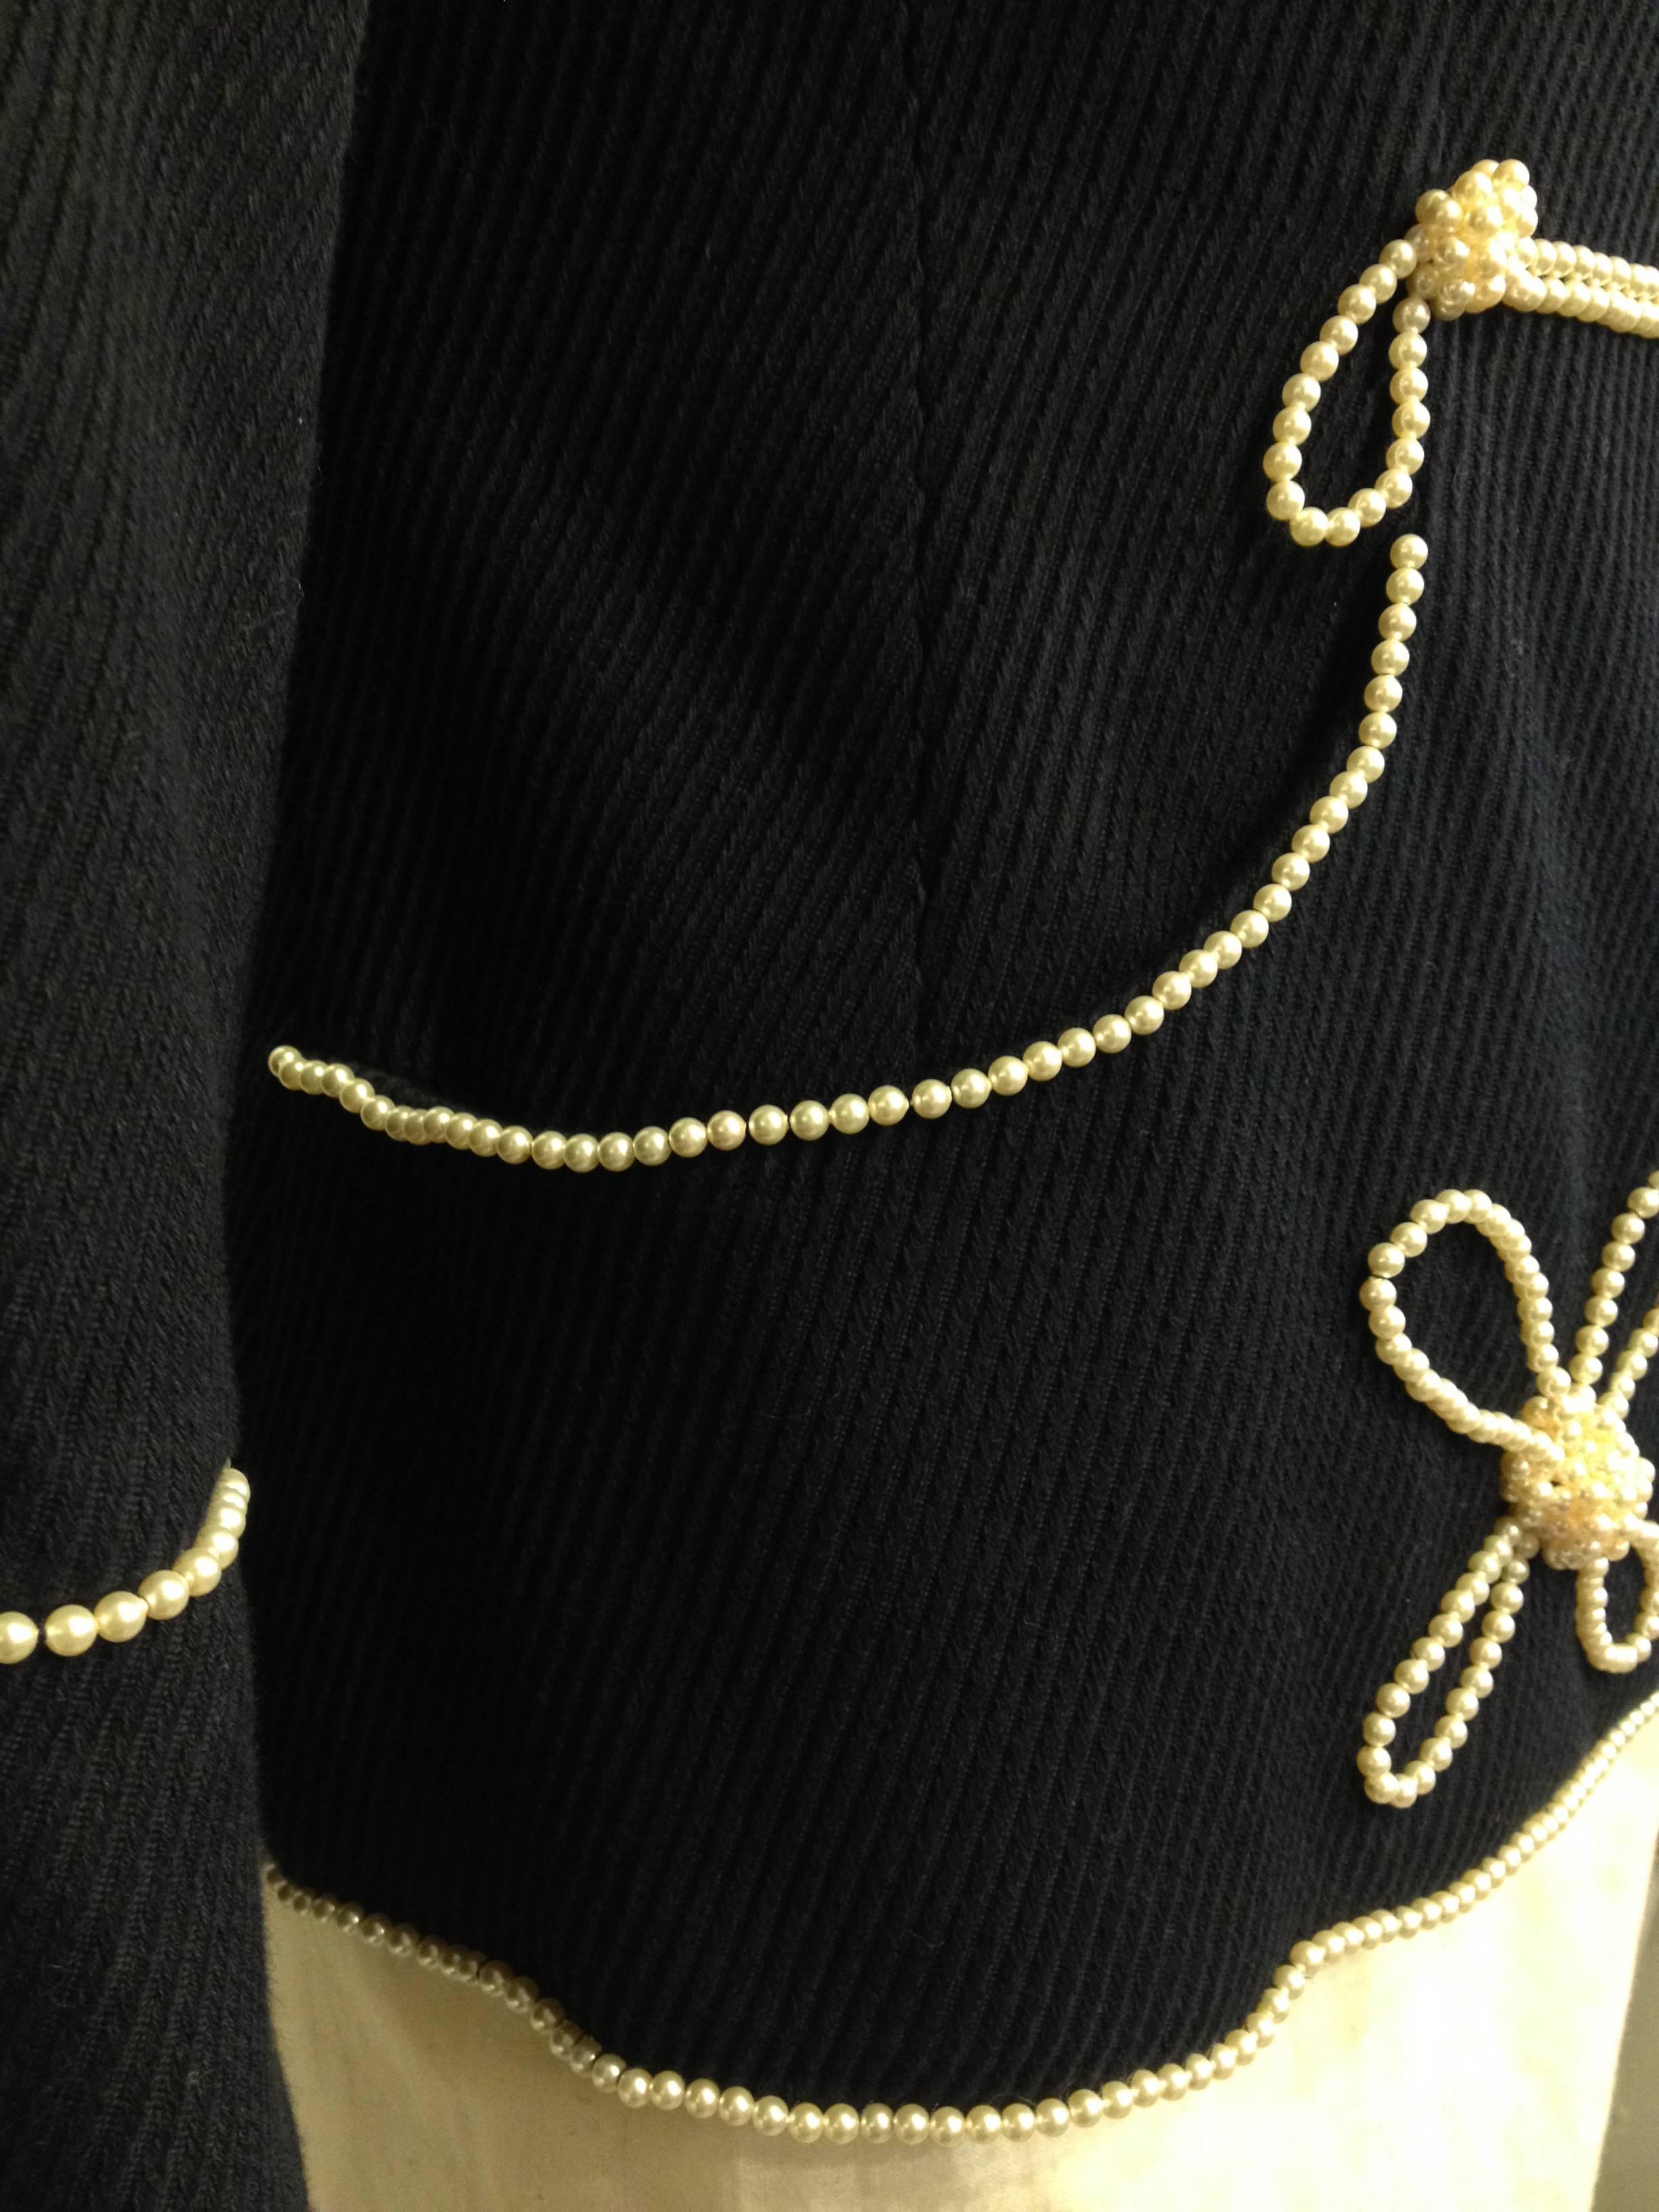 Women's Chanel Navy Majorette Jacket with Pearls